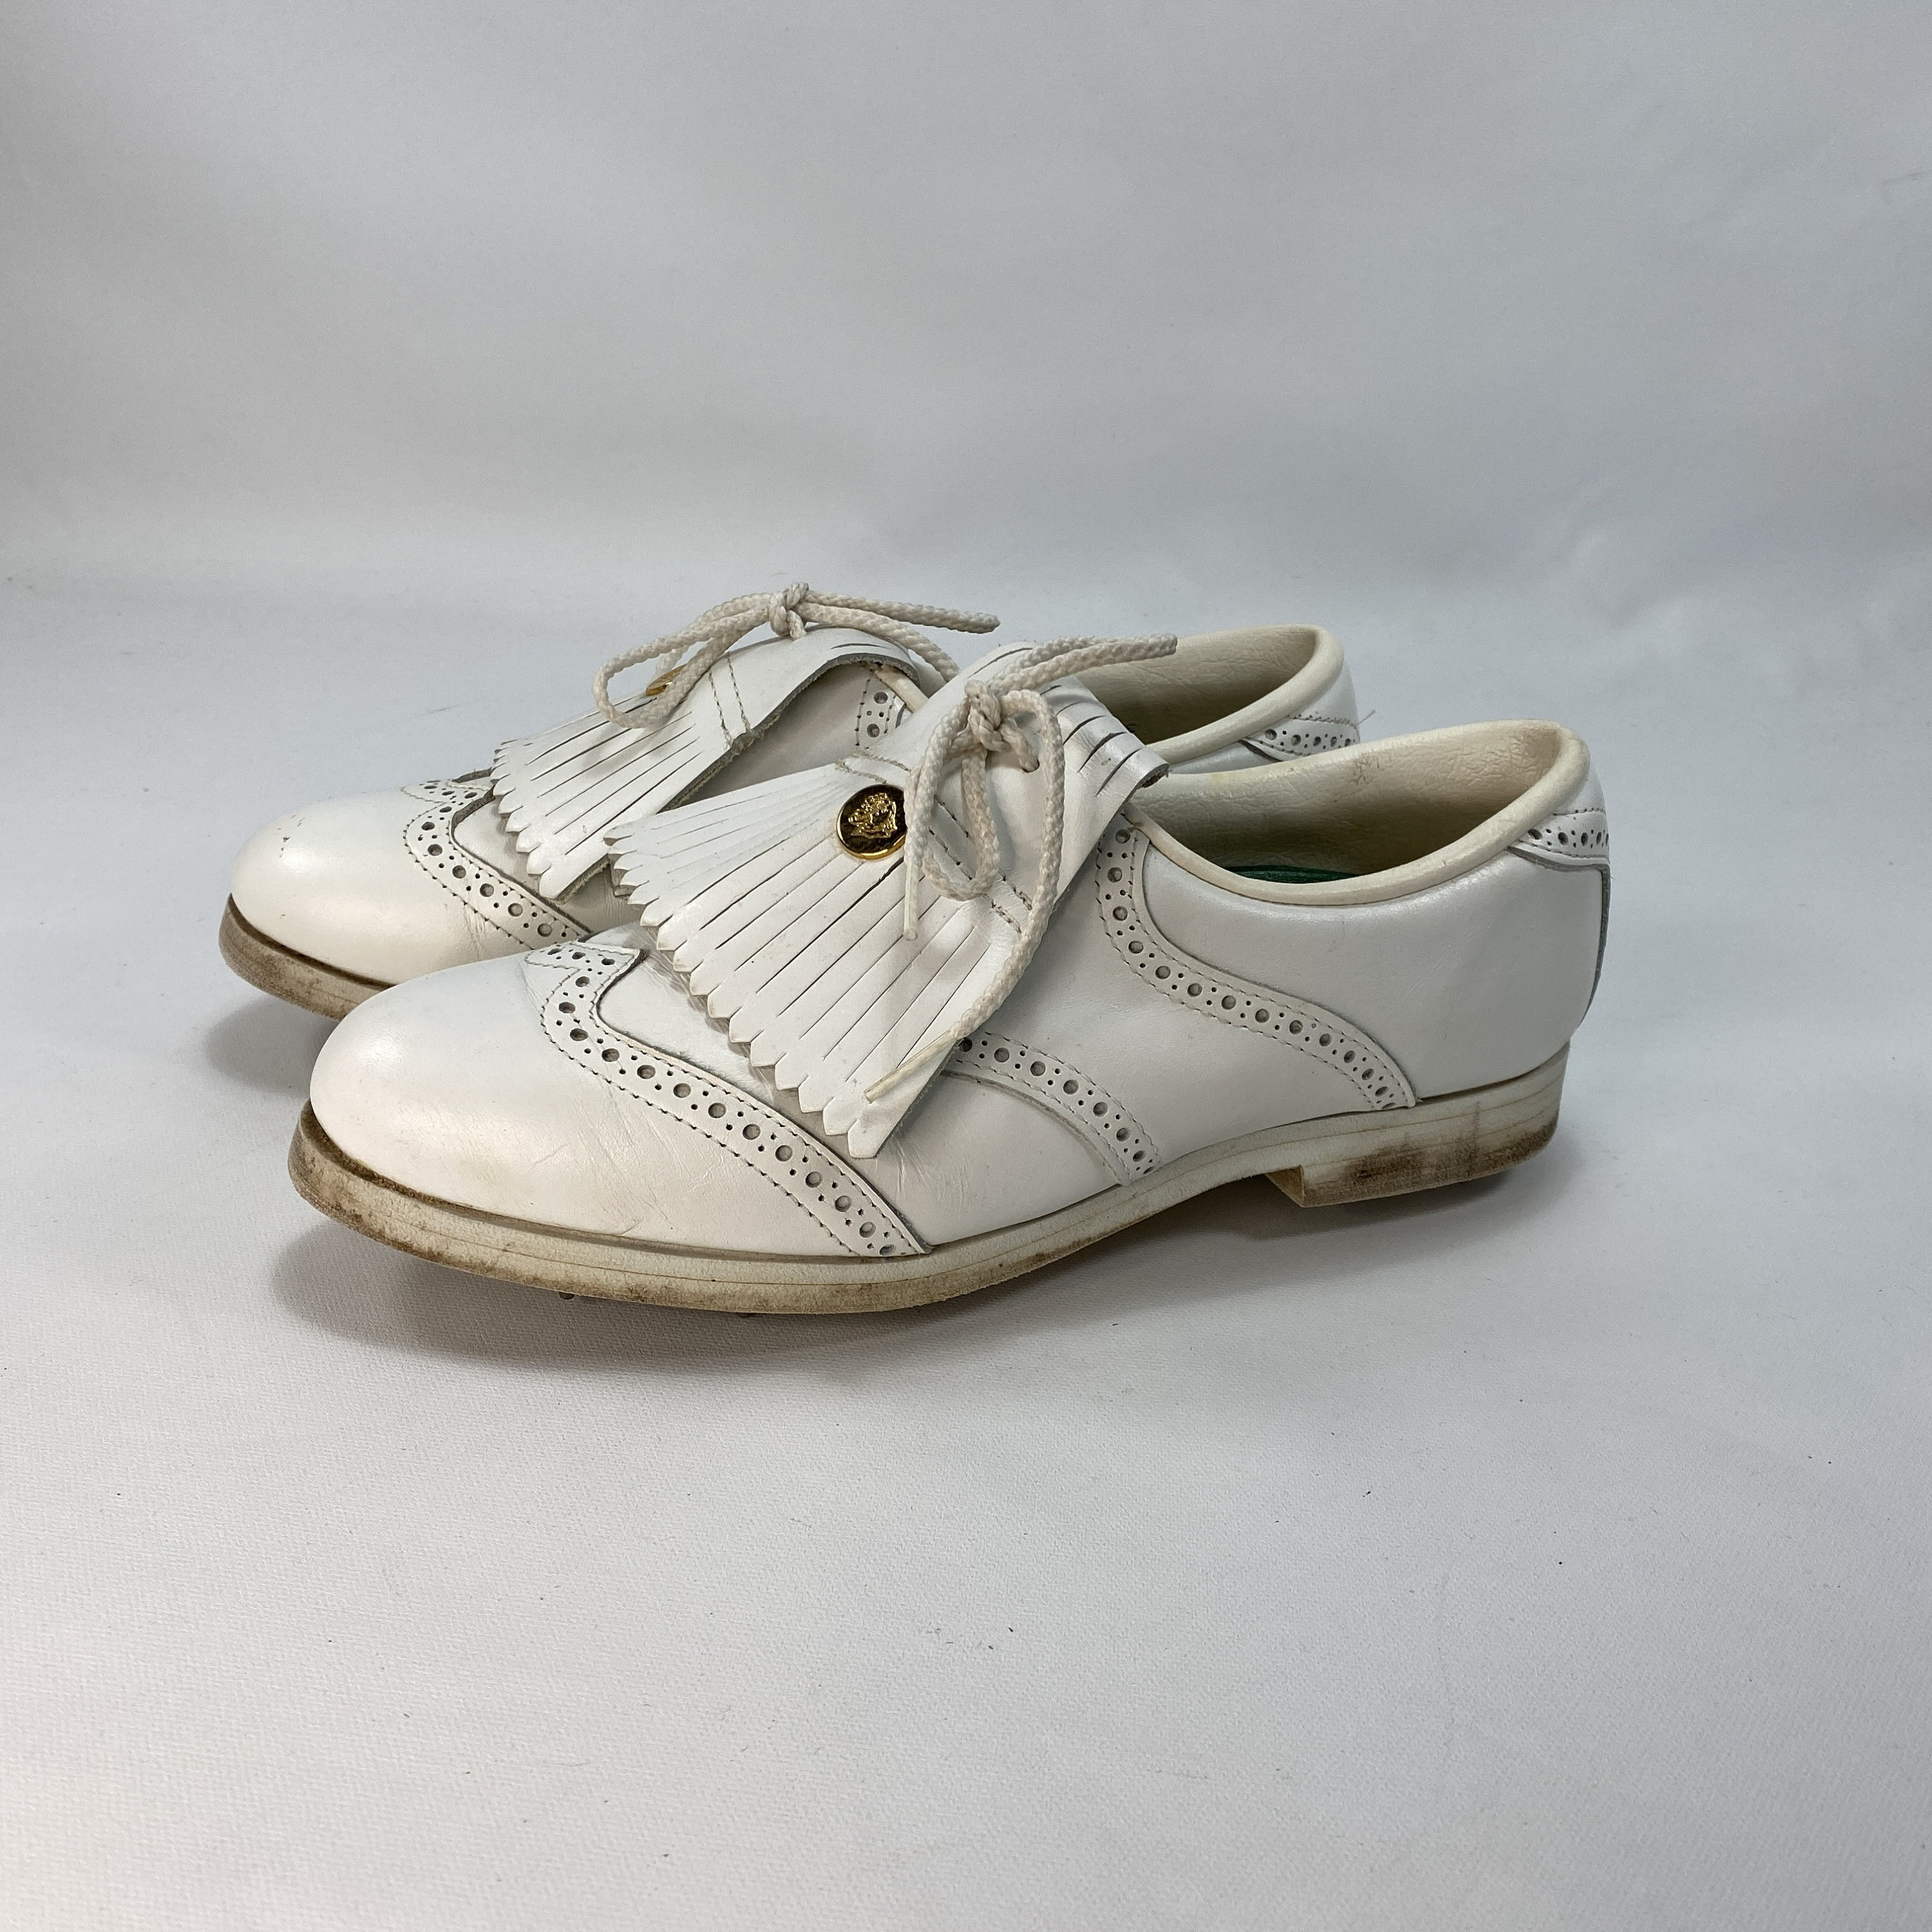 1970s Vintage Men's Golf Shoes Brown Leather Shoes with Steel Cleats / –  The Naked Man